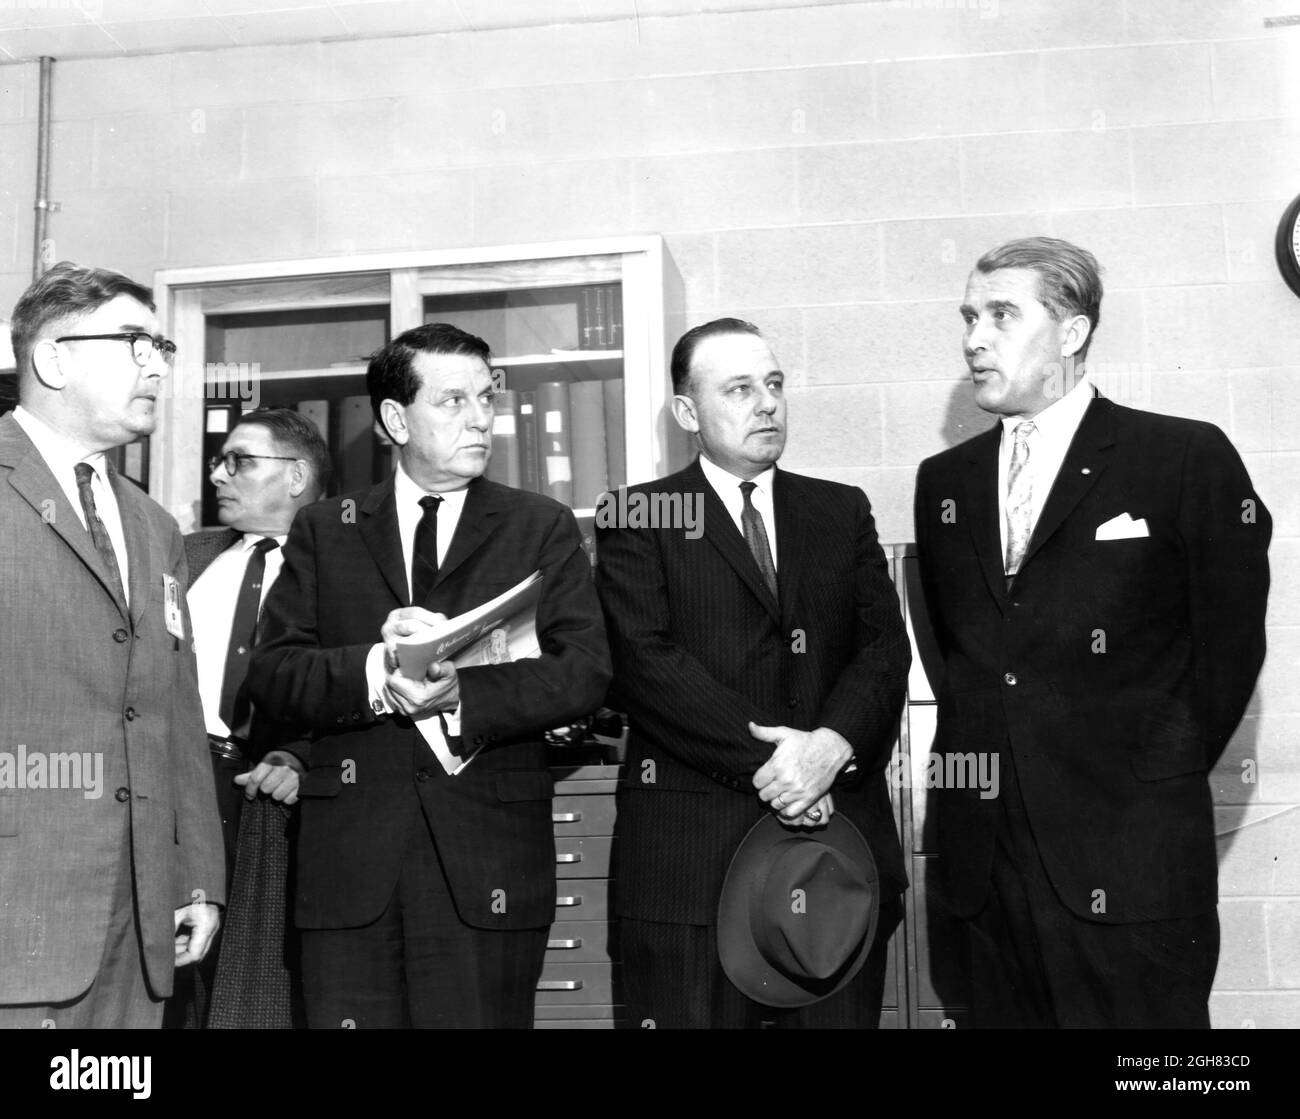 THE MEMBERS OF THE HOUSE COMMITTEE ON SCIENCE AND ASTRONAUTICS VISITED THE MARSHALL SPACE FLIGHT CENTER (MSFC) ON MARCH 9, 1962 TO GATHER FIRSTHAND INFORMATION OF THE NATION'S SPACE EXPLORATION PROGRAM.  THE CONGRESSIONAL GROUP WAS COMPOSED OF MEMBERS OF THE SUBCOMMITTEE ON MANNED SPACE FLIGHT.  THE SUBCOMMITTEE WAS BRIEFED ON MSFC'S MANNED SPACE EFFORTS EARLIER IN THE DAY AND THEN INSPECTED MOCKUJPS OF THE SATURN I WORKSHOP AND THED APOLLO TELESCOPE MOUNT,  TWO ROJECTS DEVELOPED BY MSFC FOR THE POST-APOLLO PROGRAM.  IN THIS PHOTOGRAPH, MSFC DIRECTOR, DR. WERNHER VON BRAUN (FAR RIGHT)  IS HAVI Stock Photo